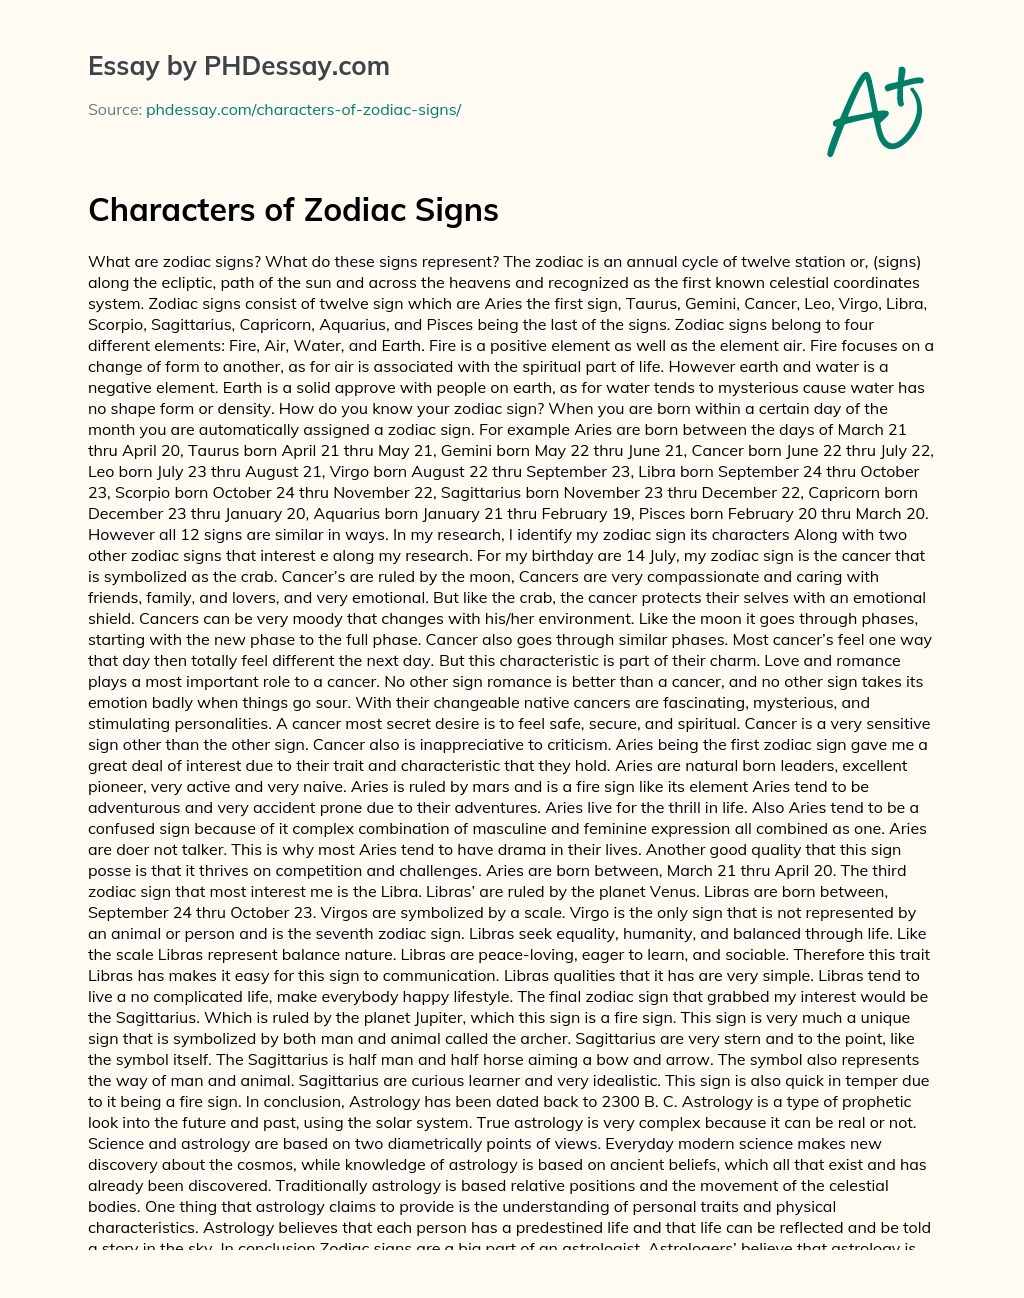 Characters of Zodiac Signs essay